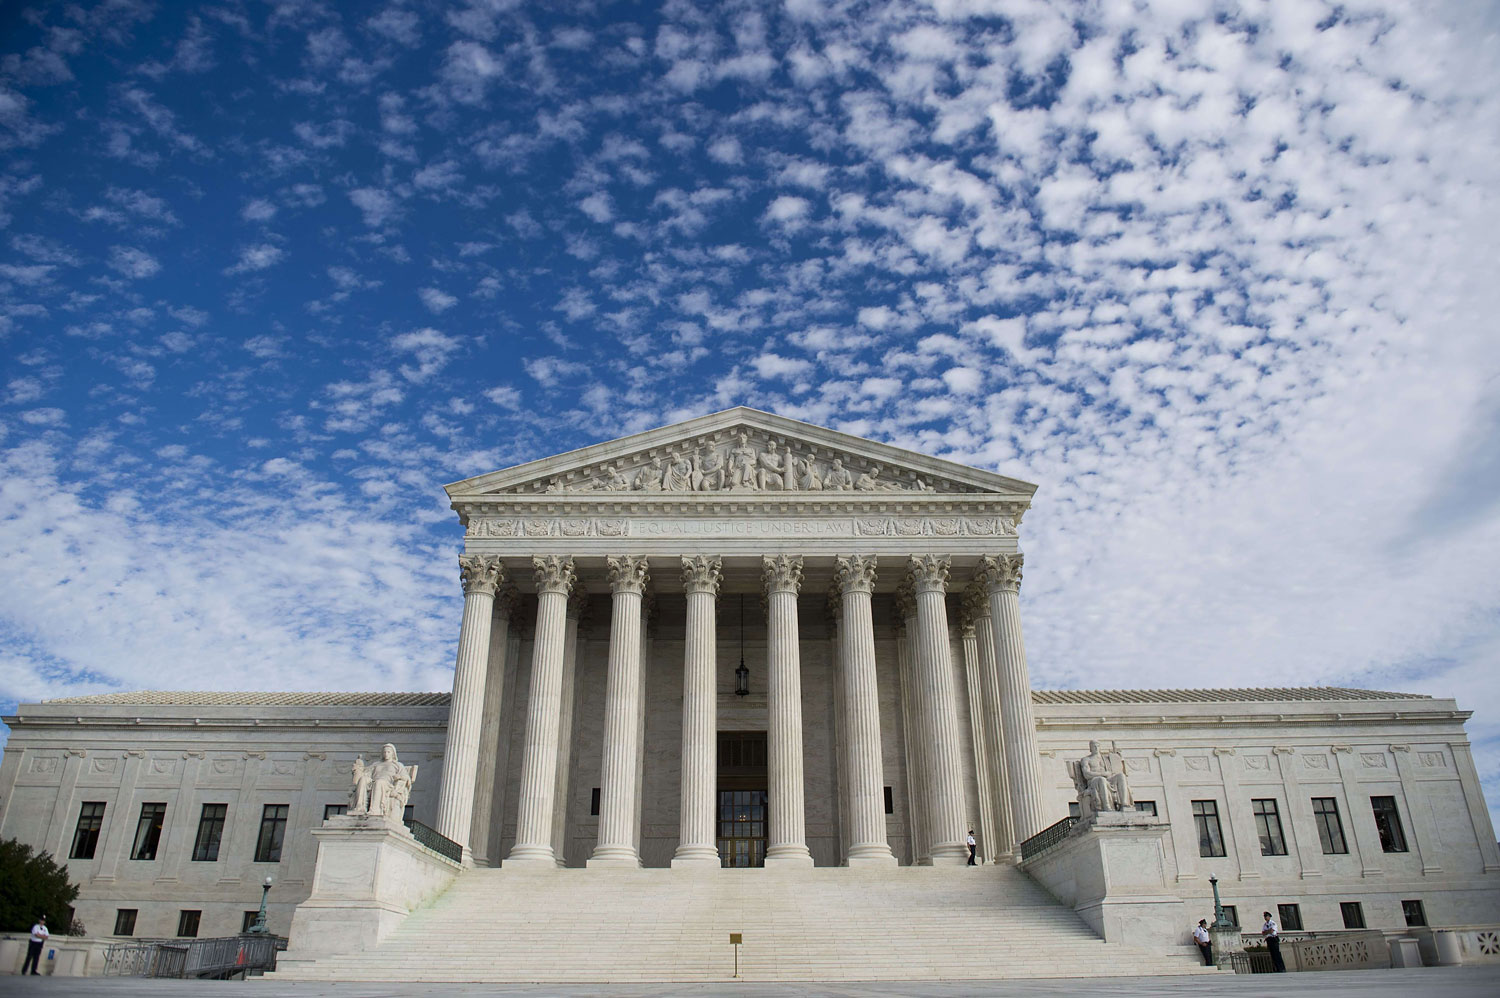 The Supreme Court in Washington, DC, seen in 2013.